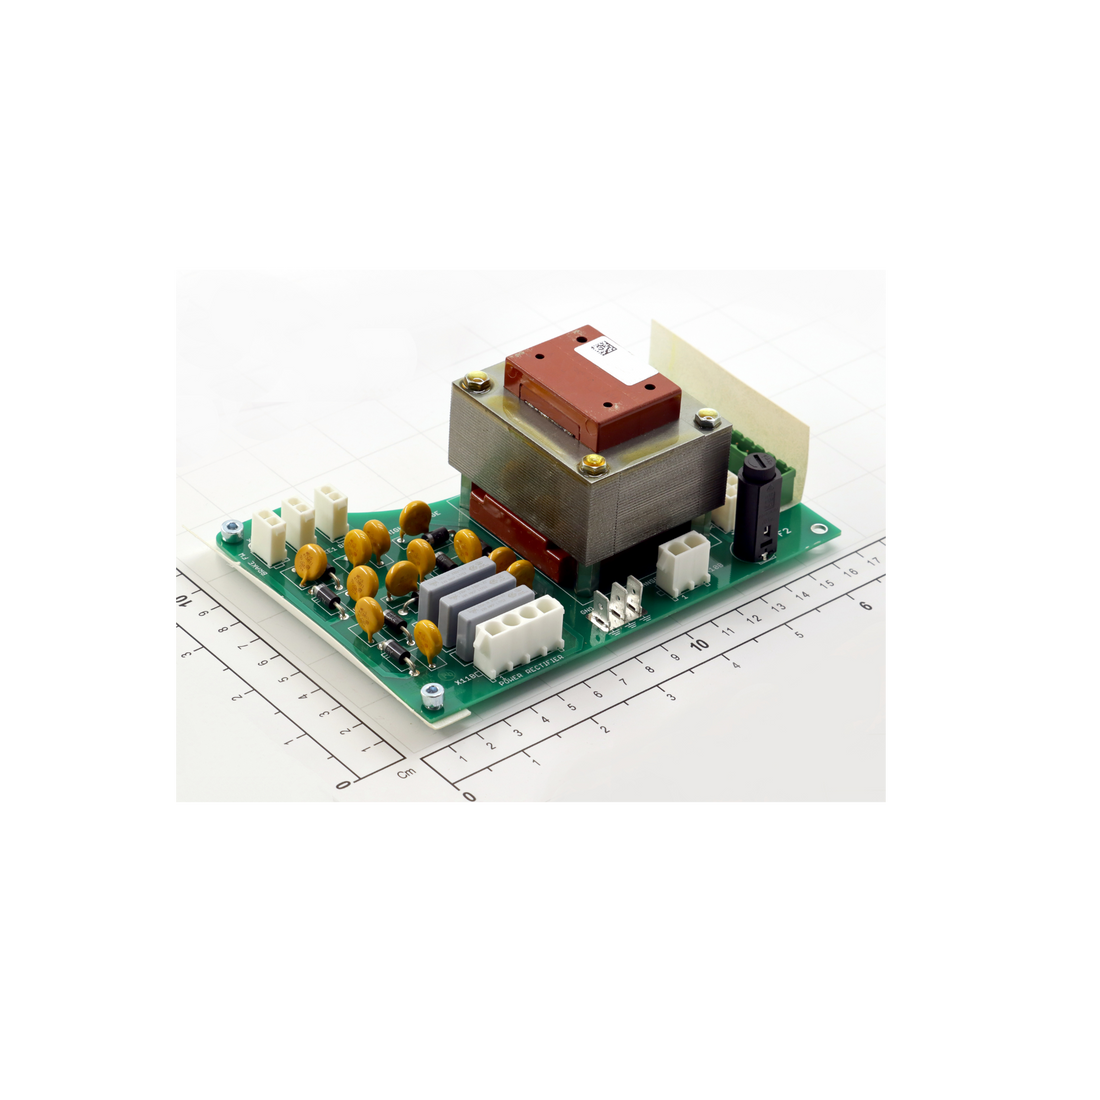 R&M Part - Power Supply Board, Part Number: 3000007542